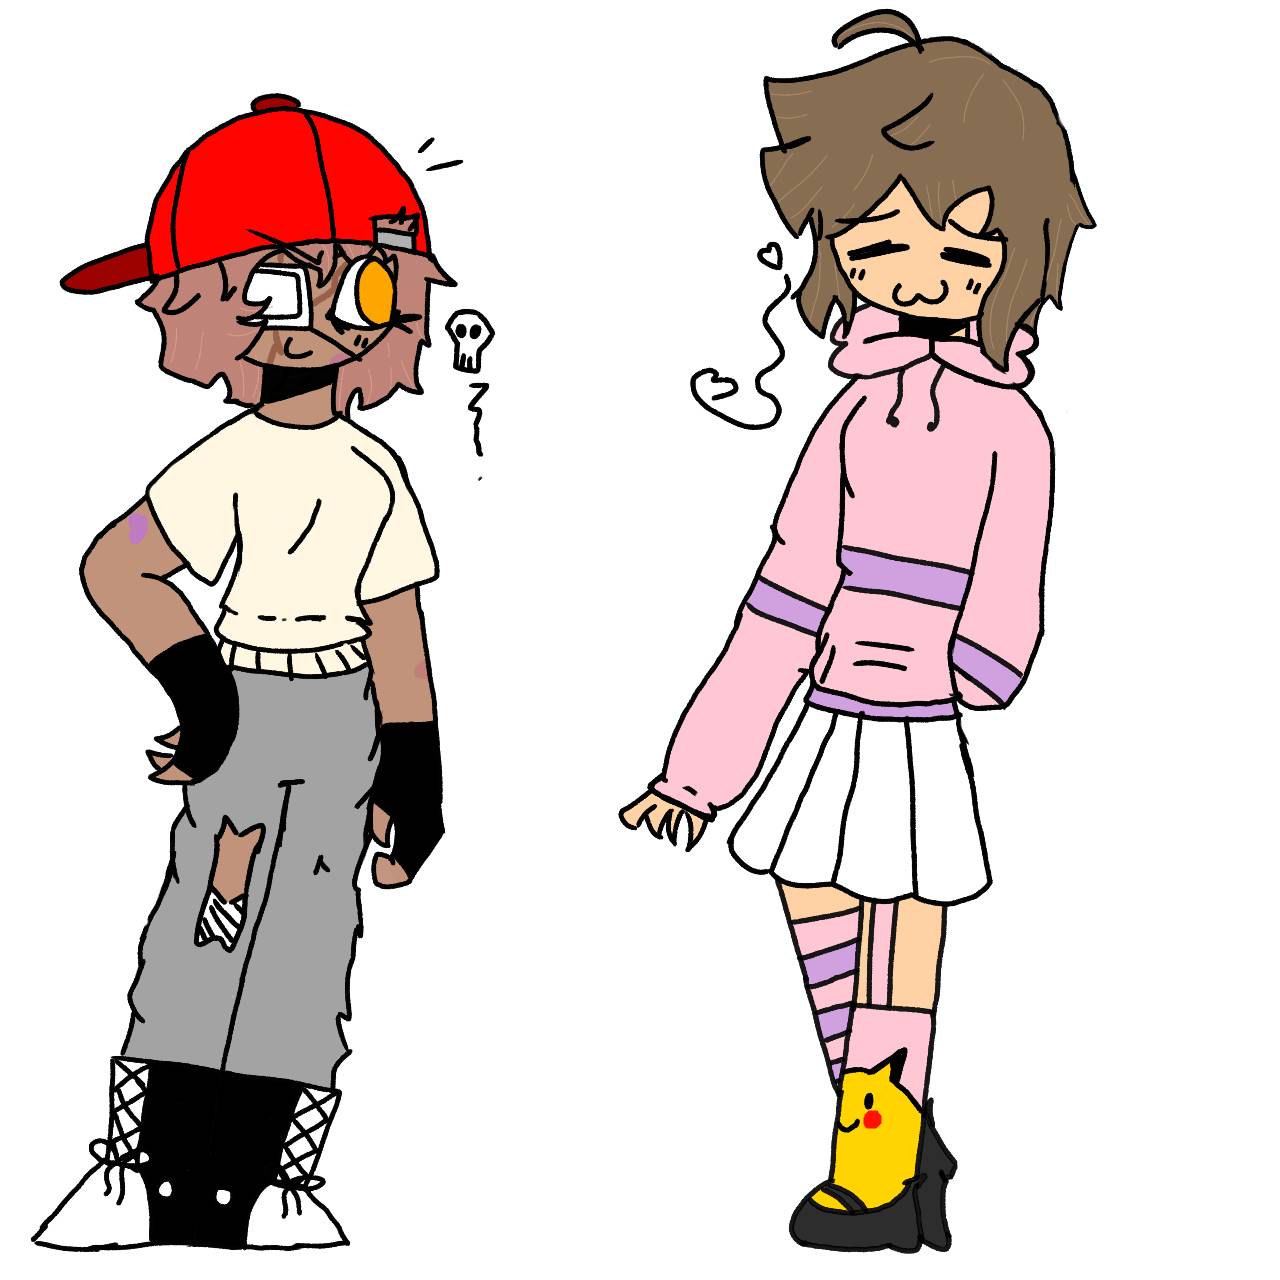 The Tomboy and the Femboy by SophieArt2009 on DeviantArt